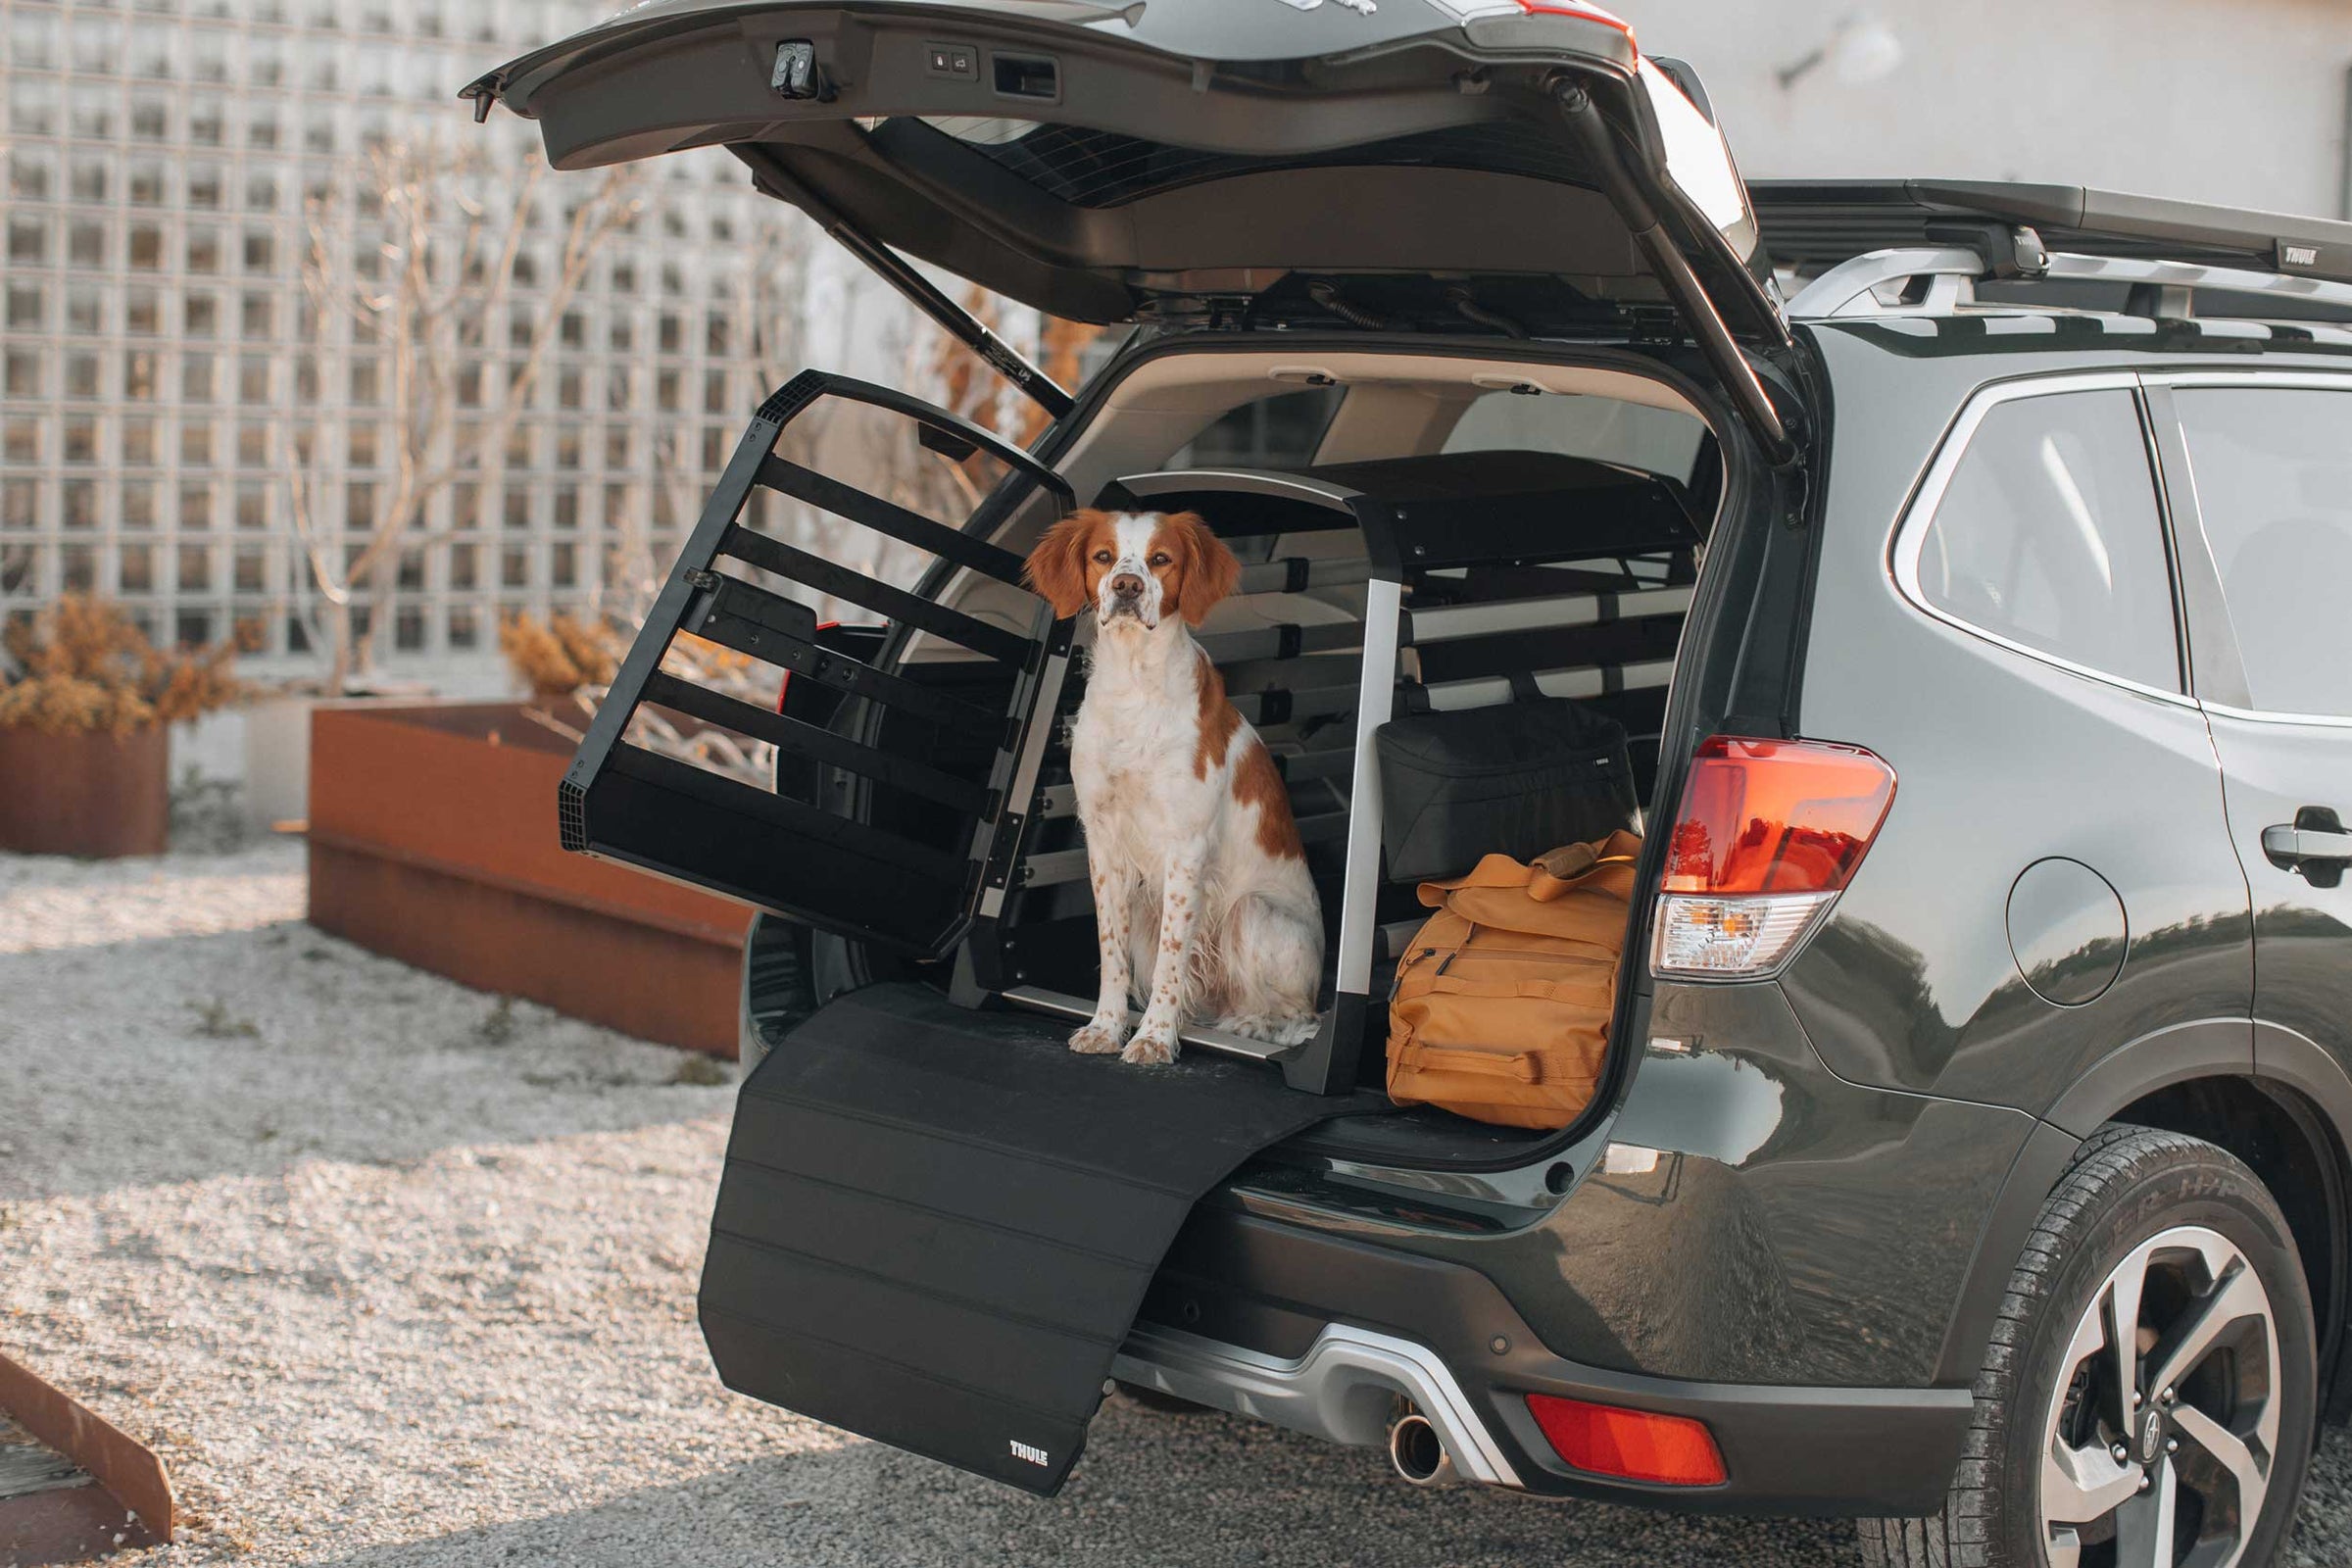 Thule Allax dog crate and dog crate accessories keep you dog safe and comfortable in transport